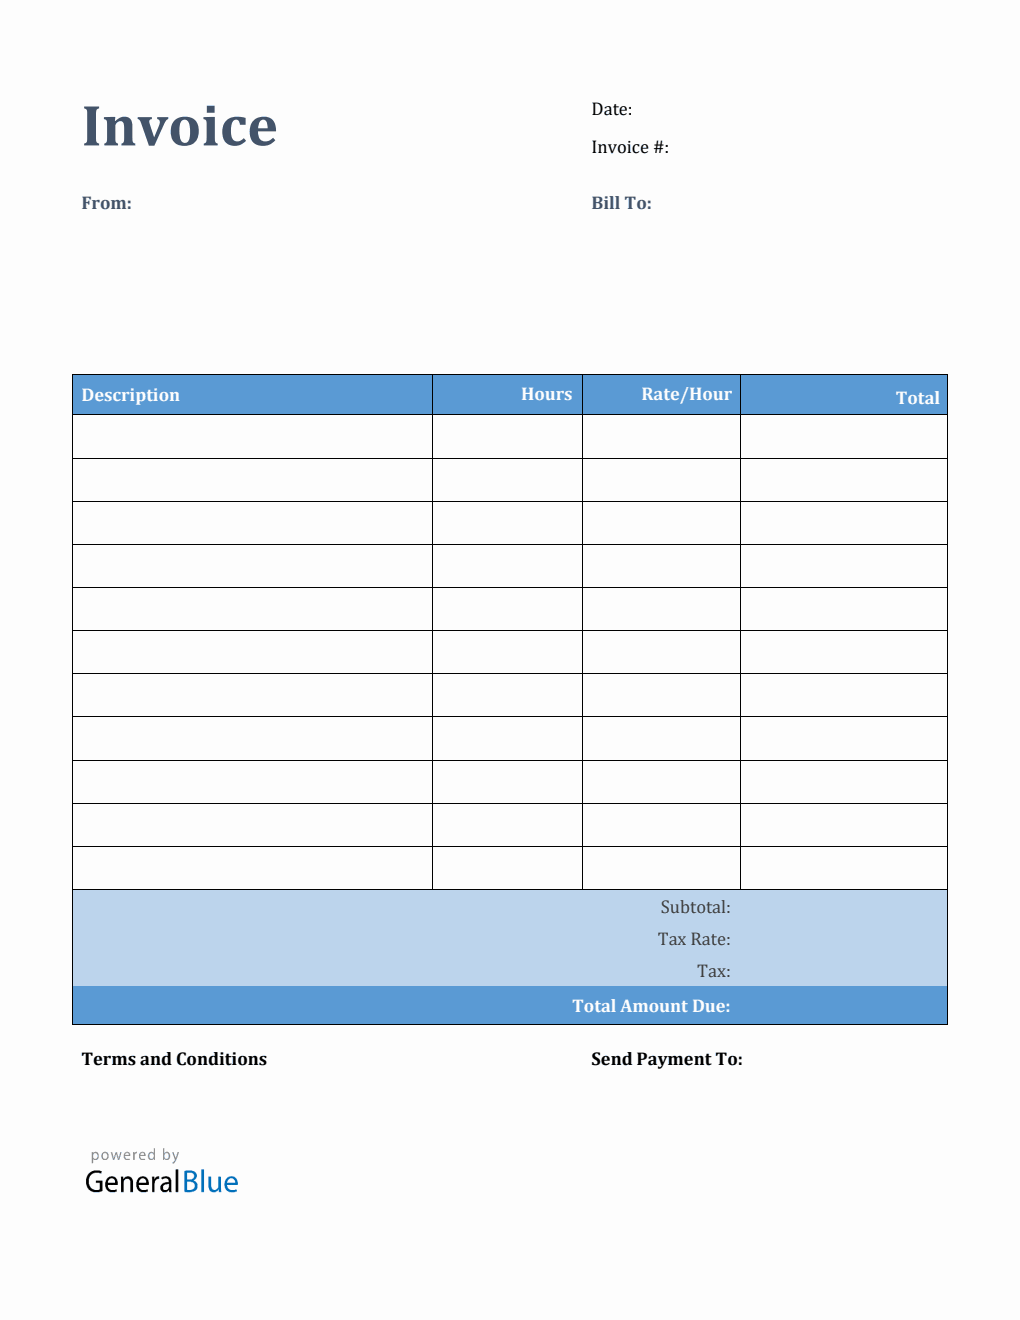 PDF Invoice Template for U.S. Freelancers With Tax calculation (Colorful)